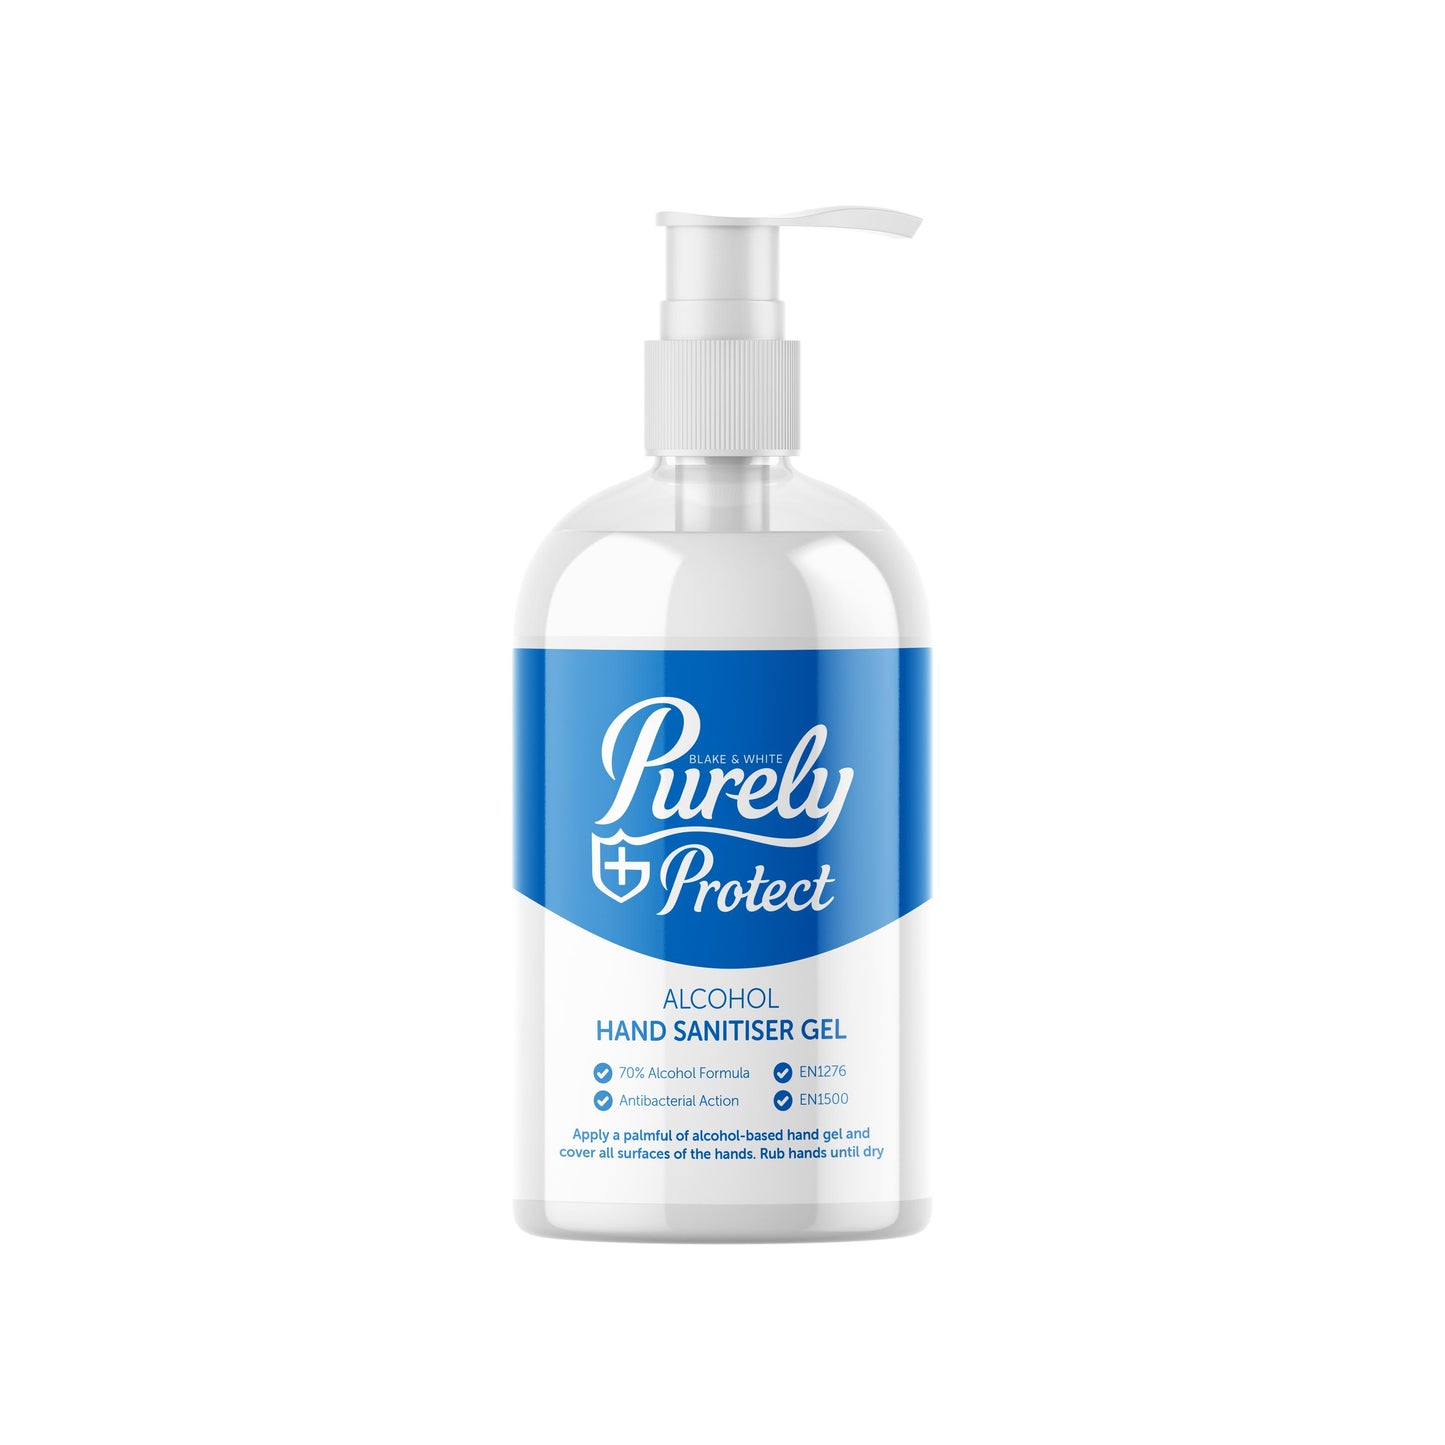 Purely Protect Hand Sanitiser 500ml Pump